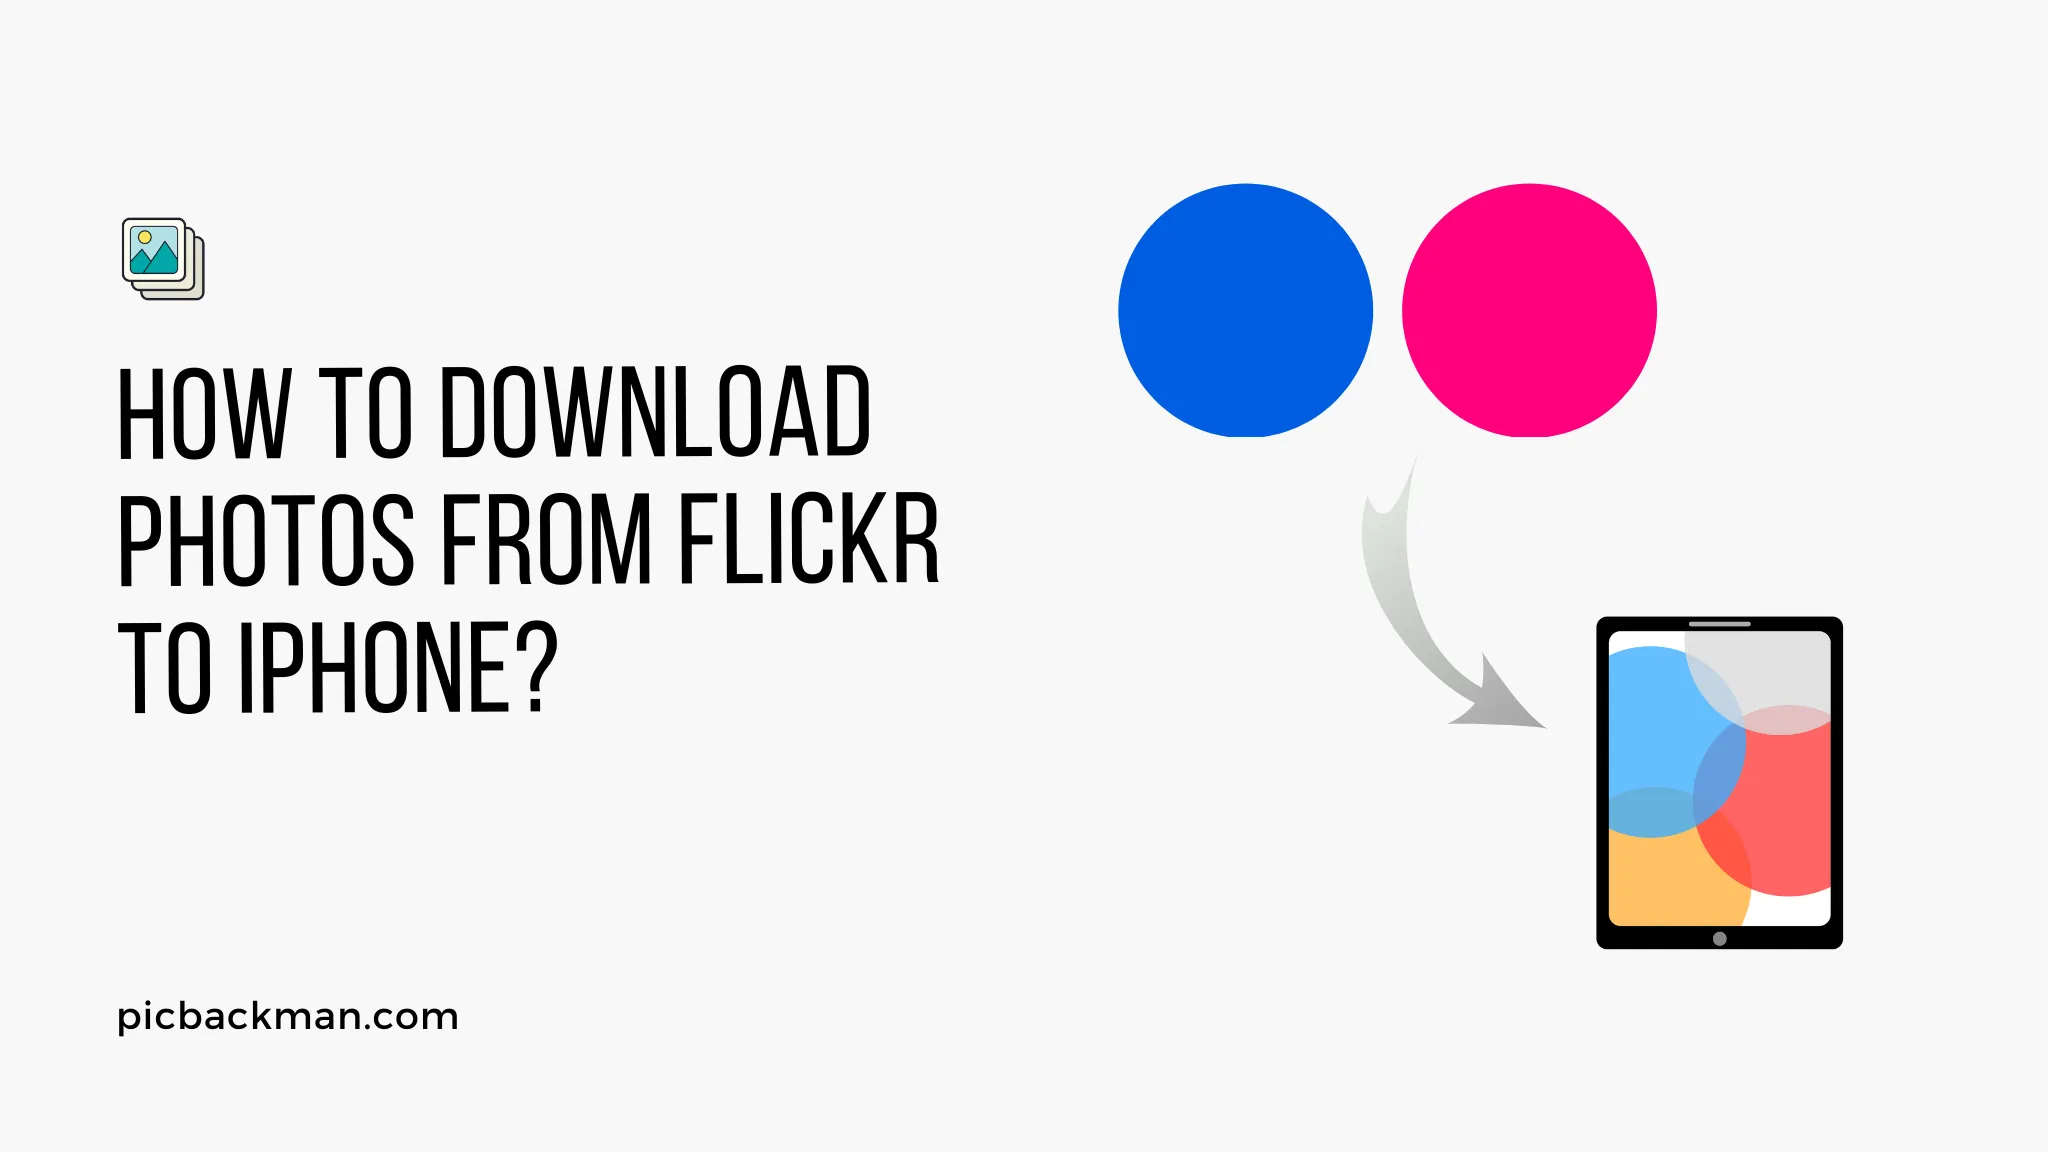 How to Download Photos from Flickr to iPhone